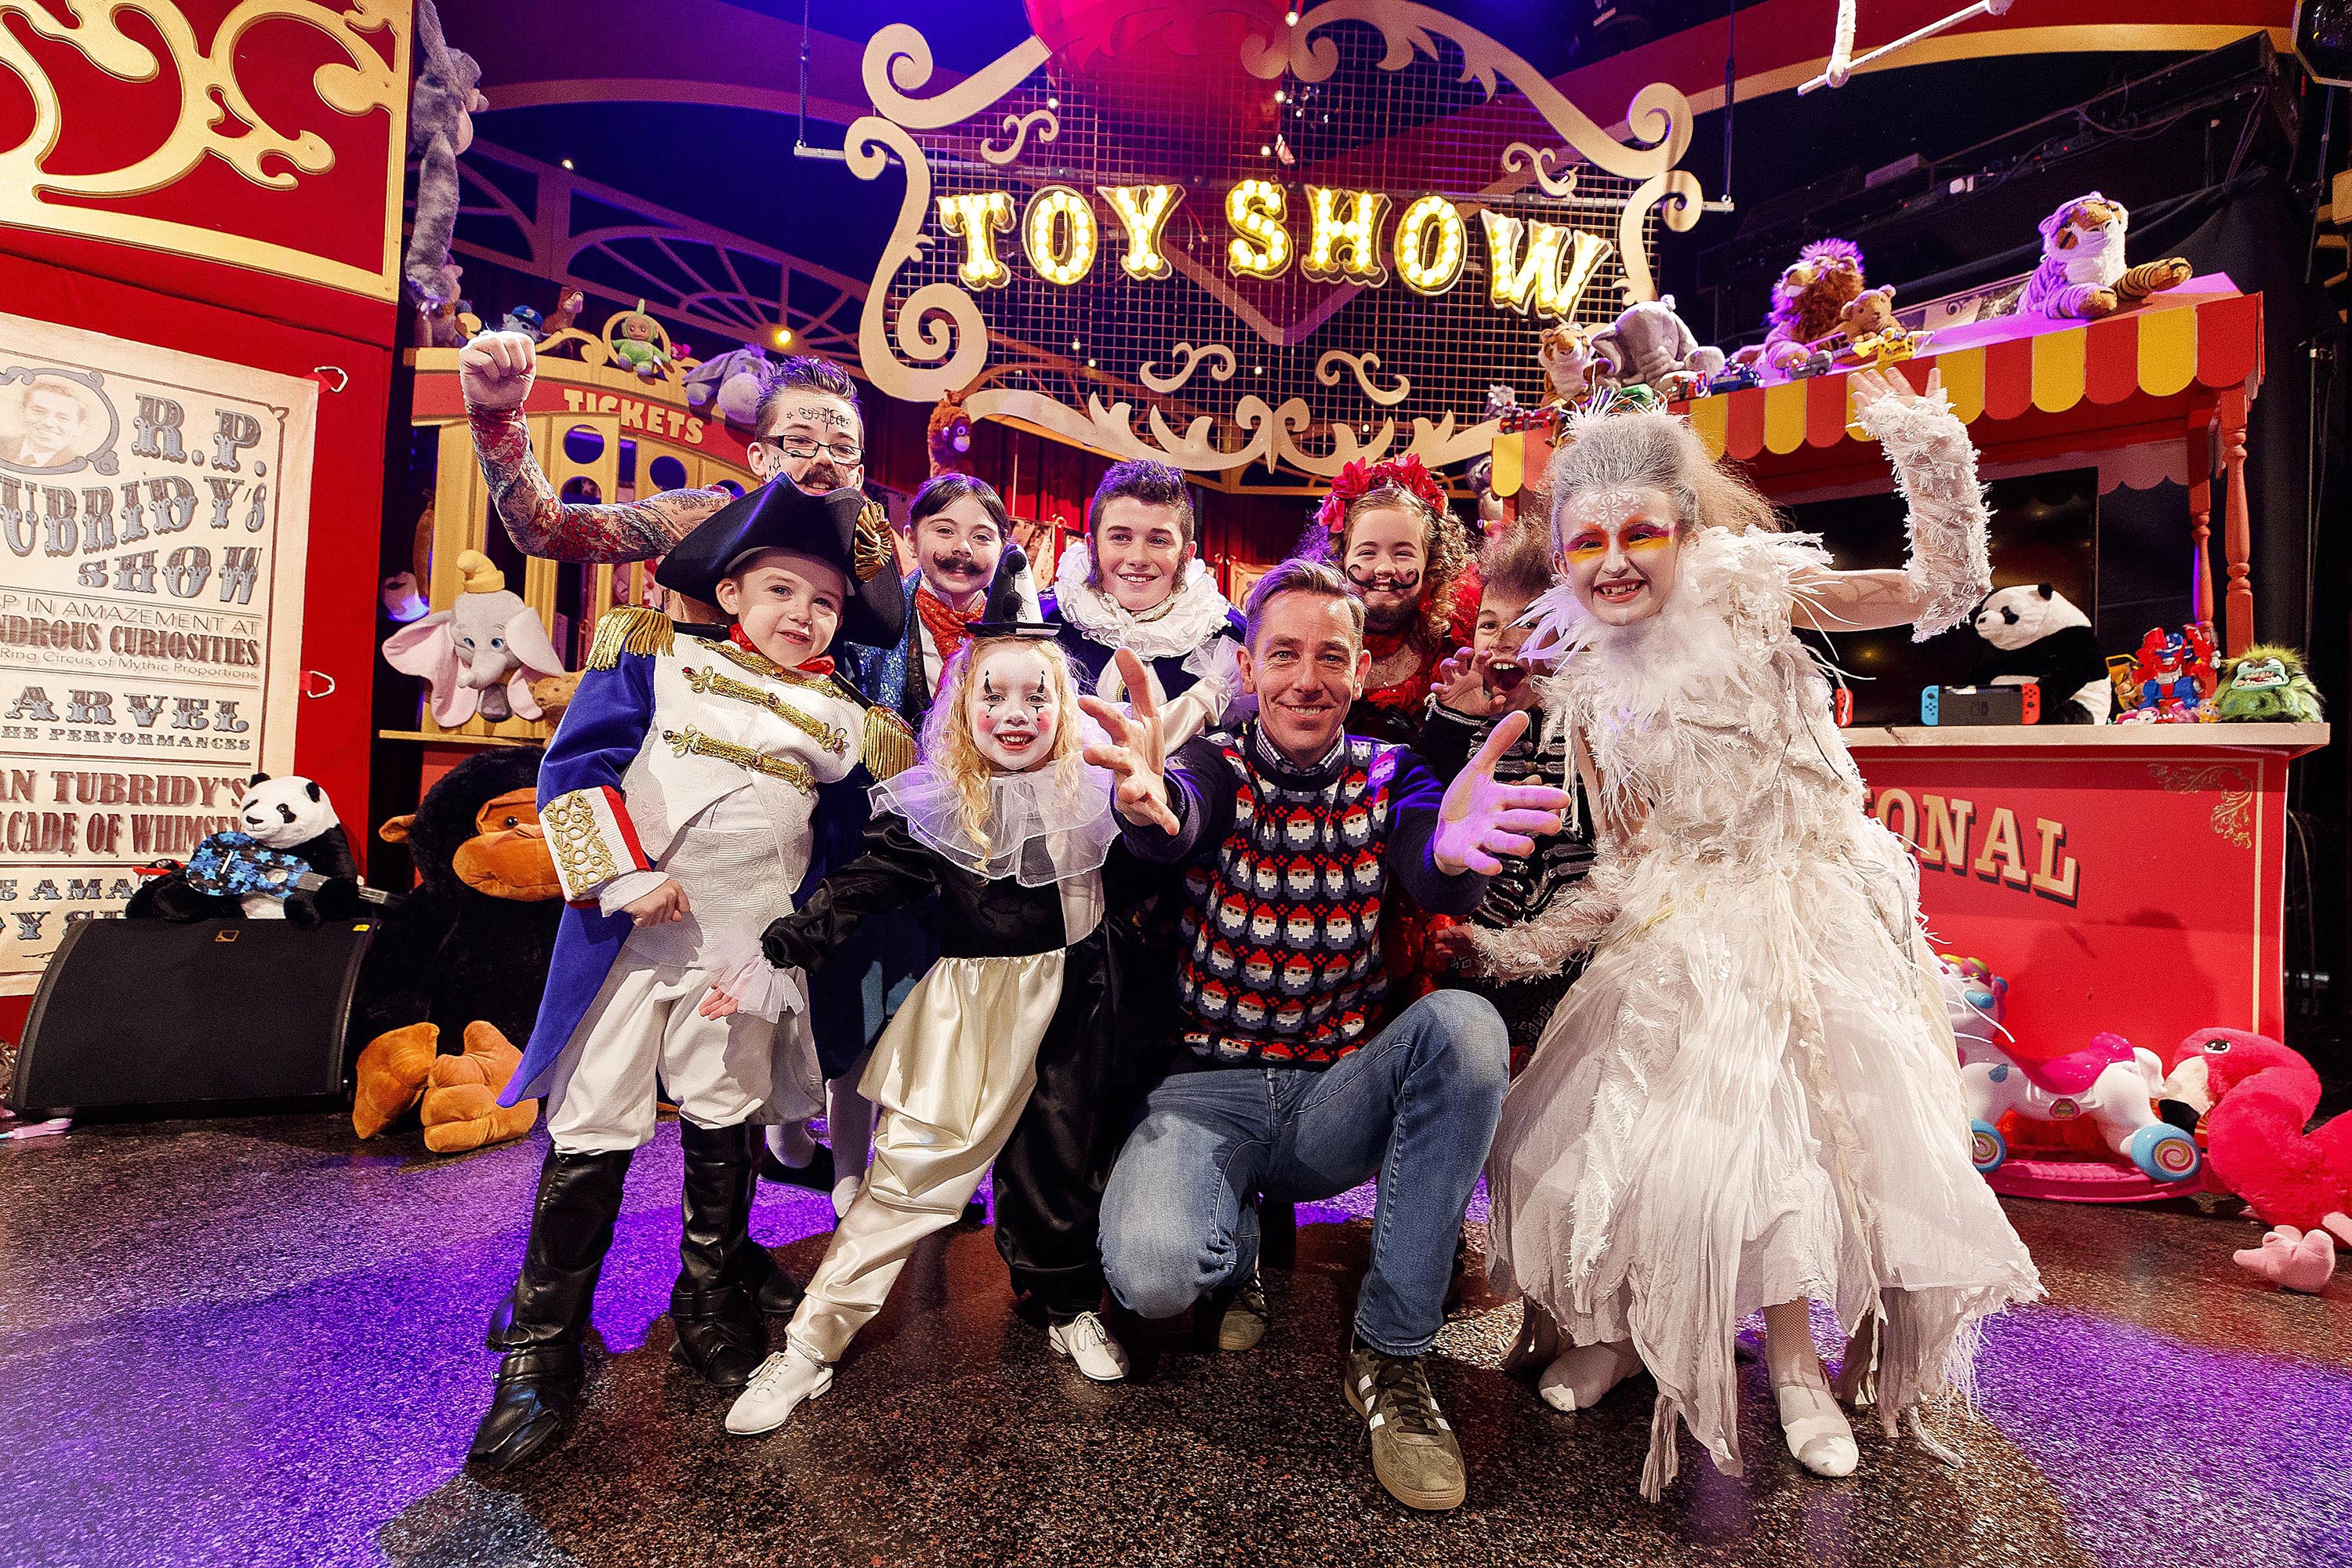 Musings: I never watched the Late Late Toy Show as a child and now I finally understand why